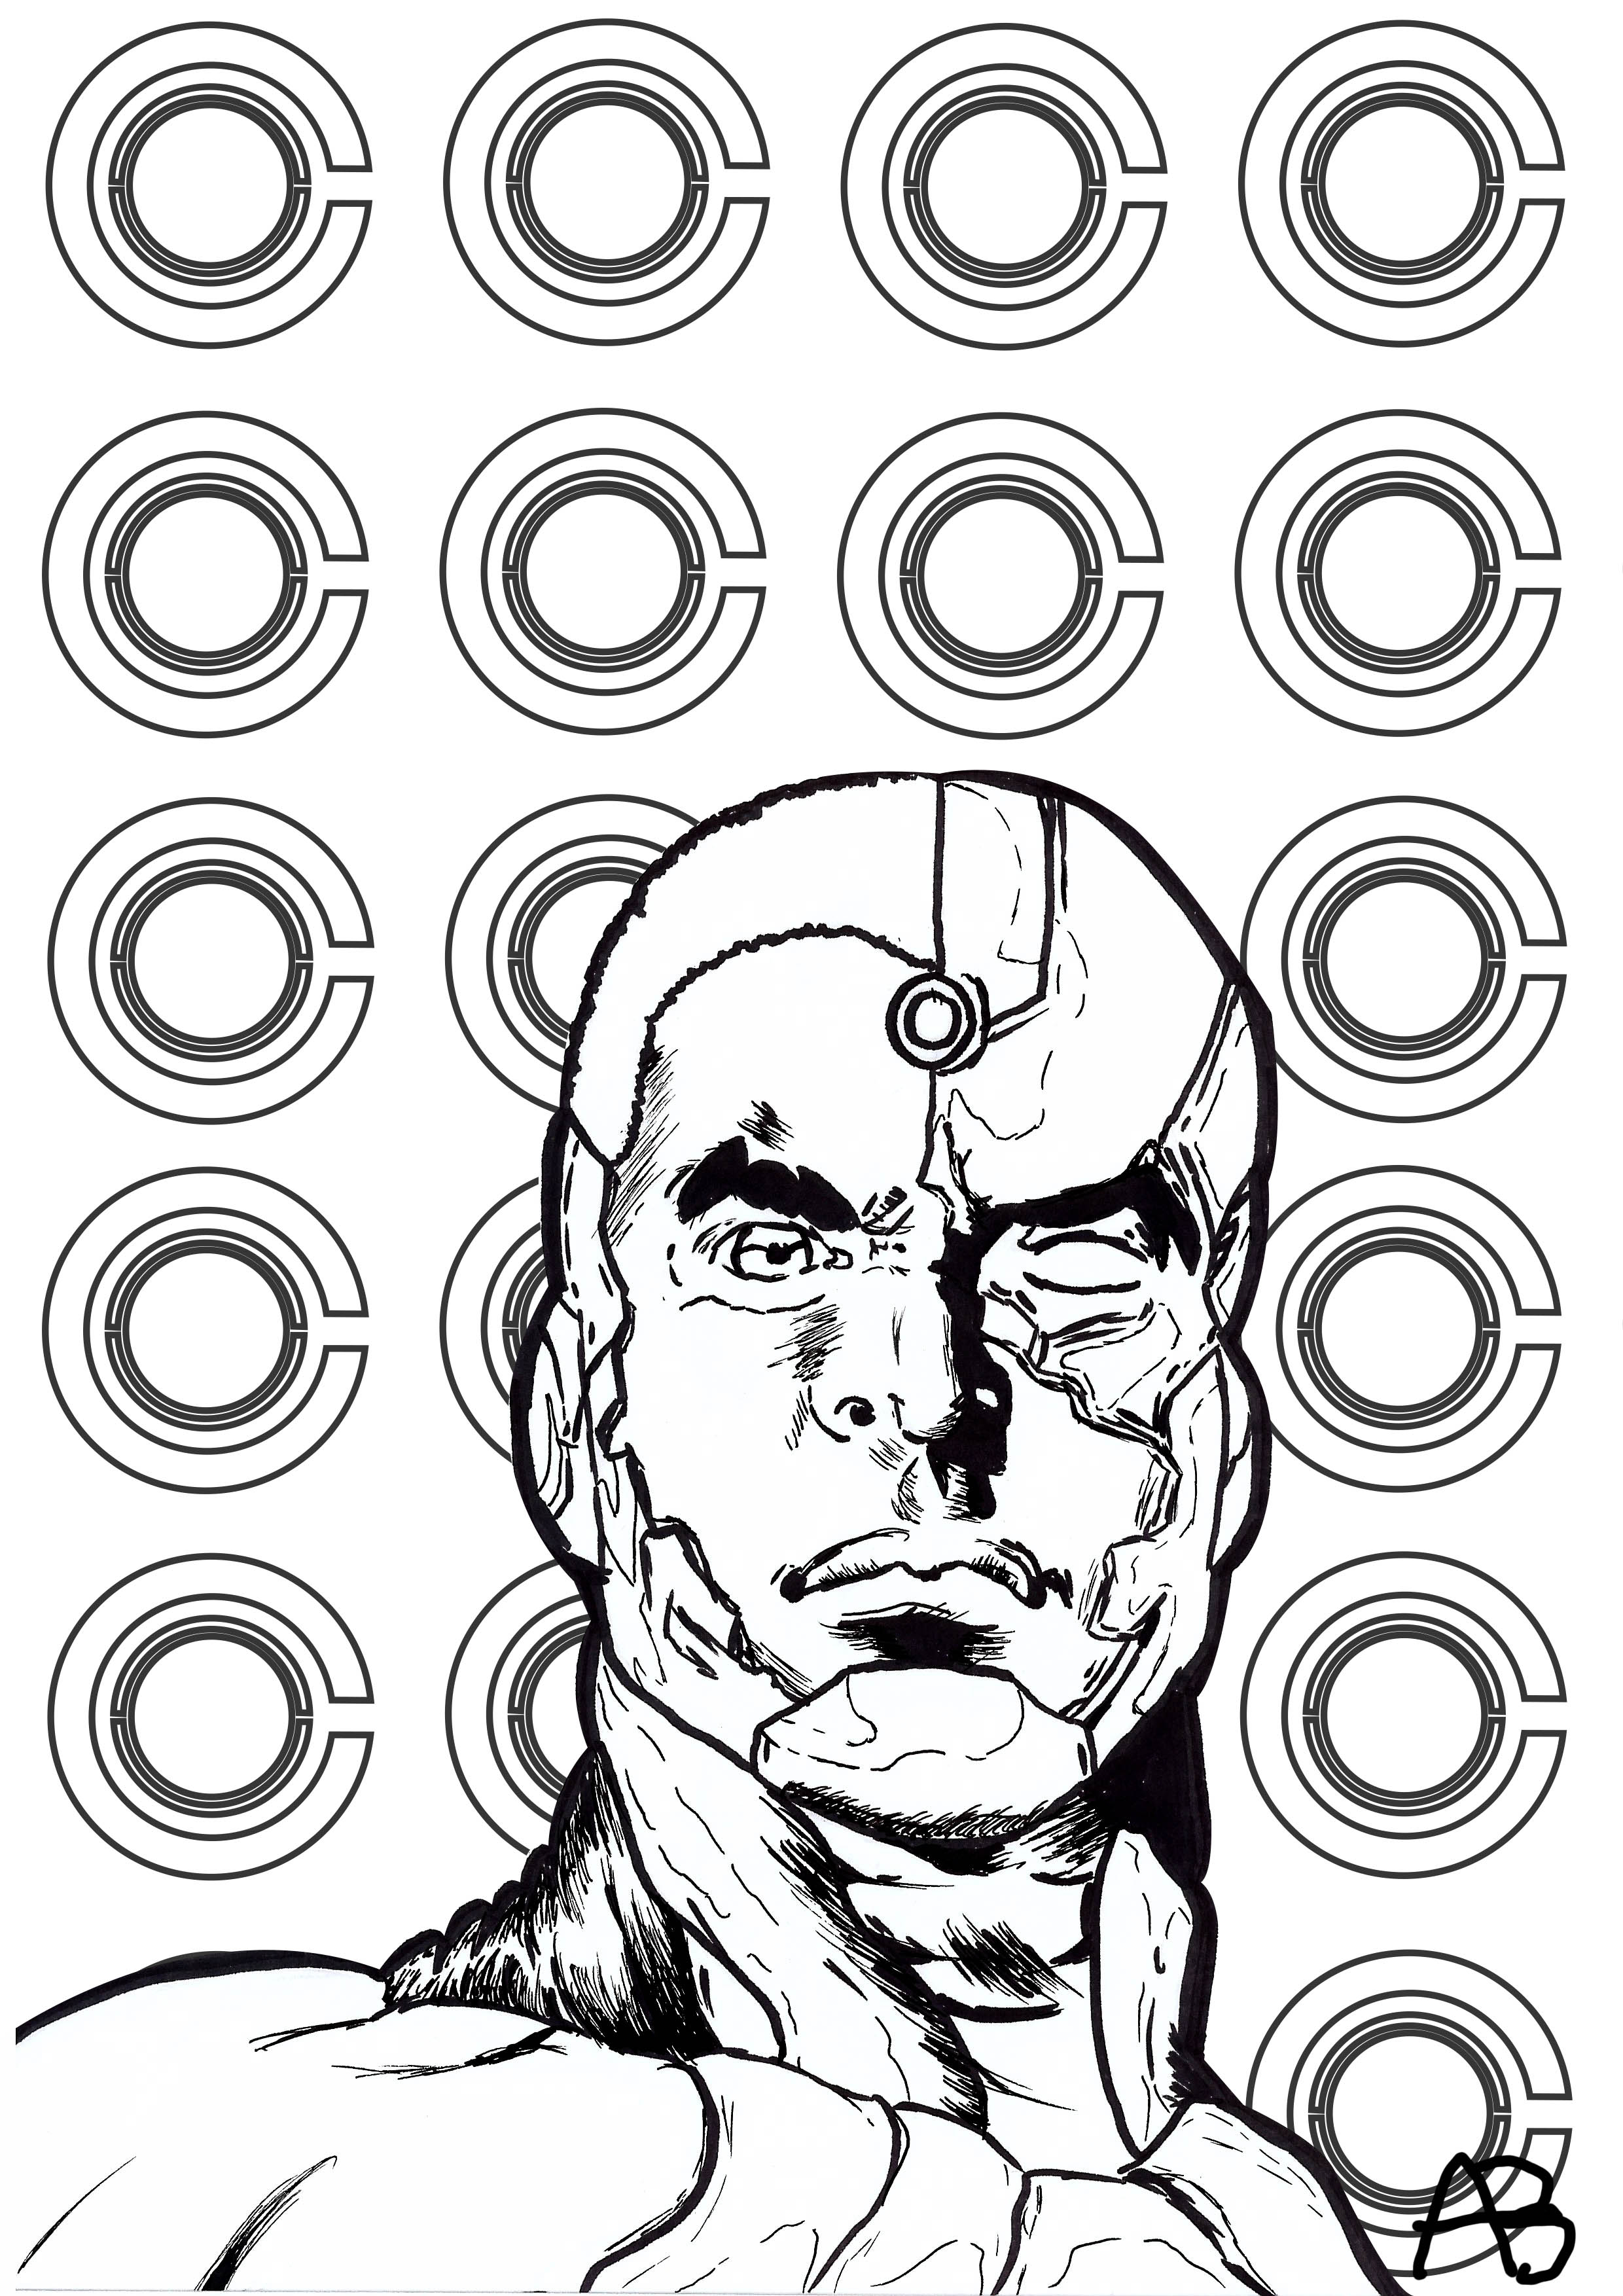 Coloring page inspired by Cyborg (DC Comics character), Artist : Allan